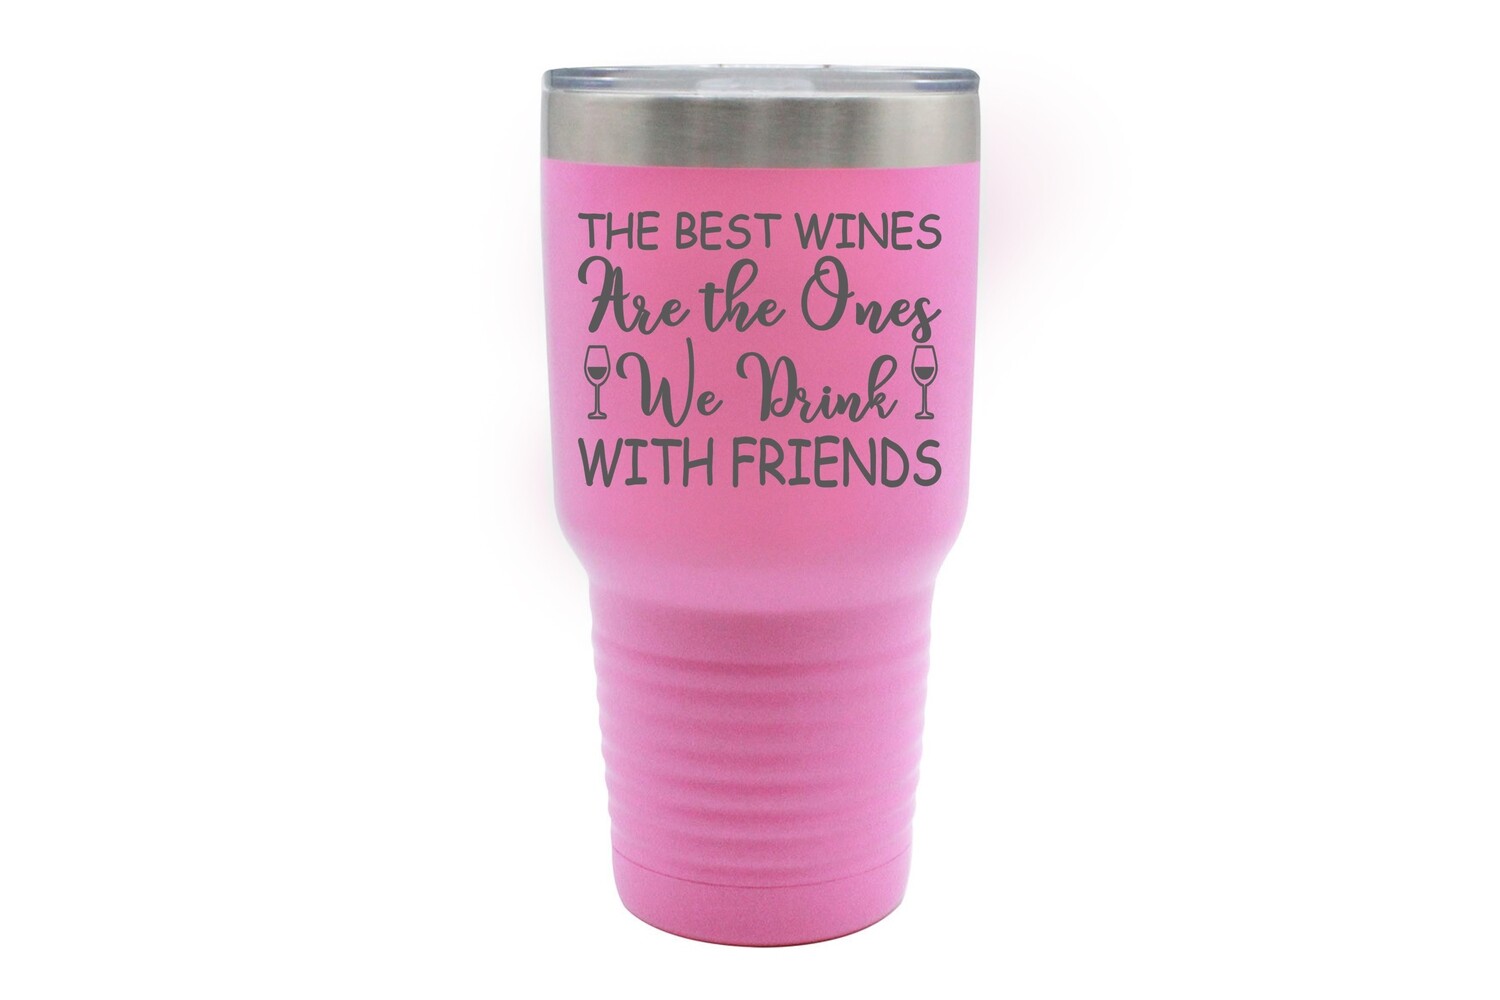 The Best Wines are the Ones We Drink with Friends Insulated Tumbler 30 oz